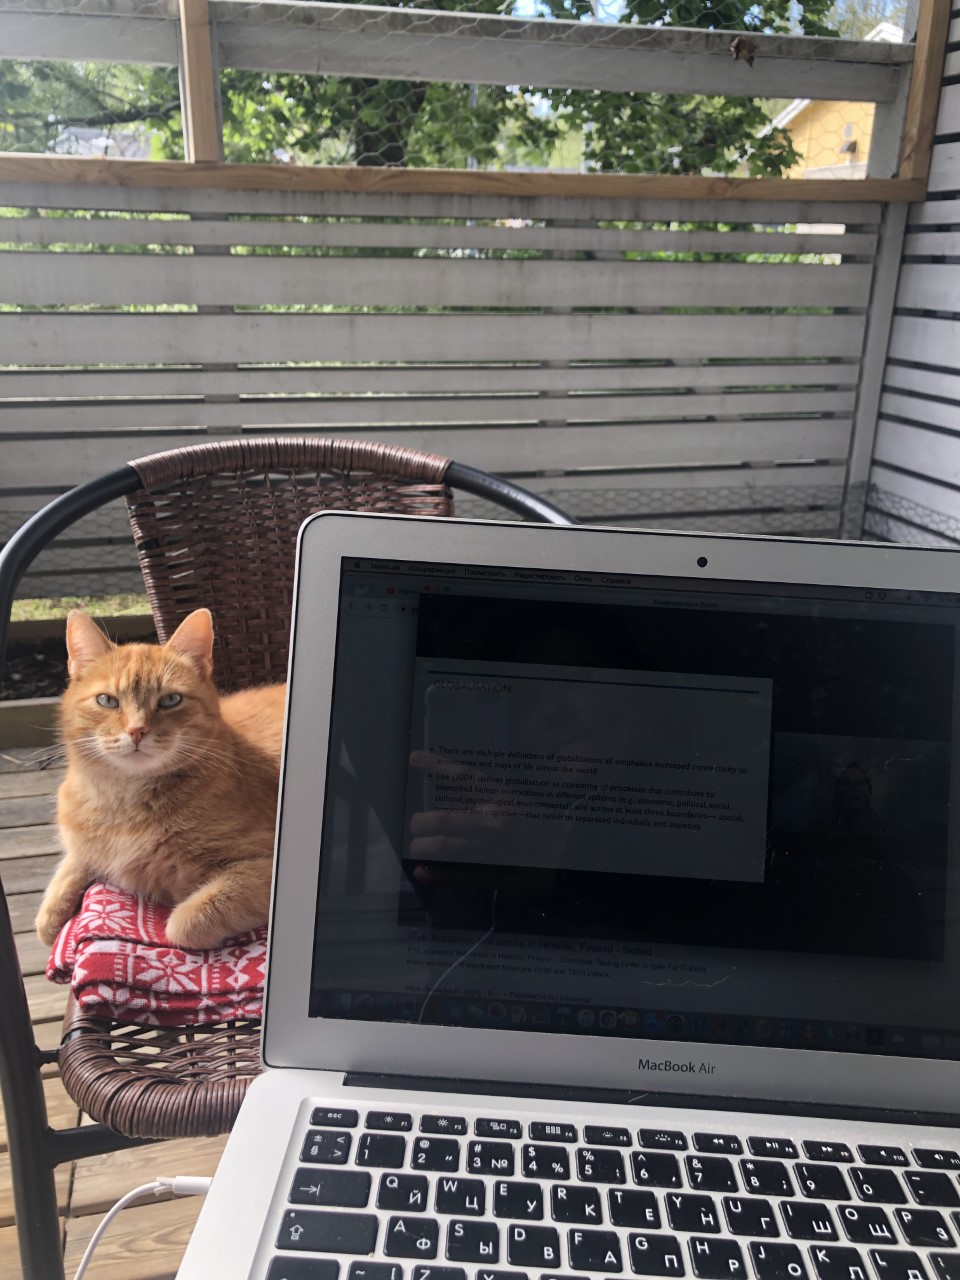 A cat sitting next to a laptop.